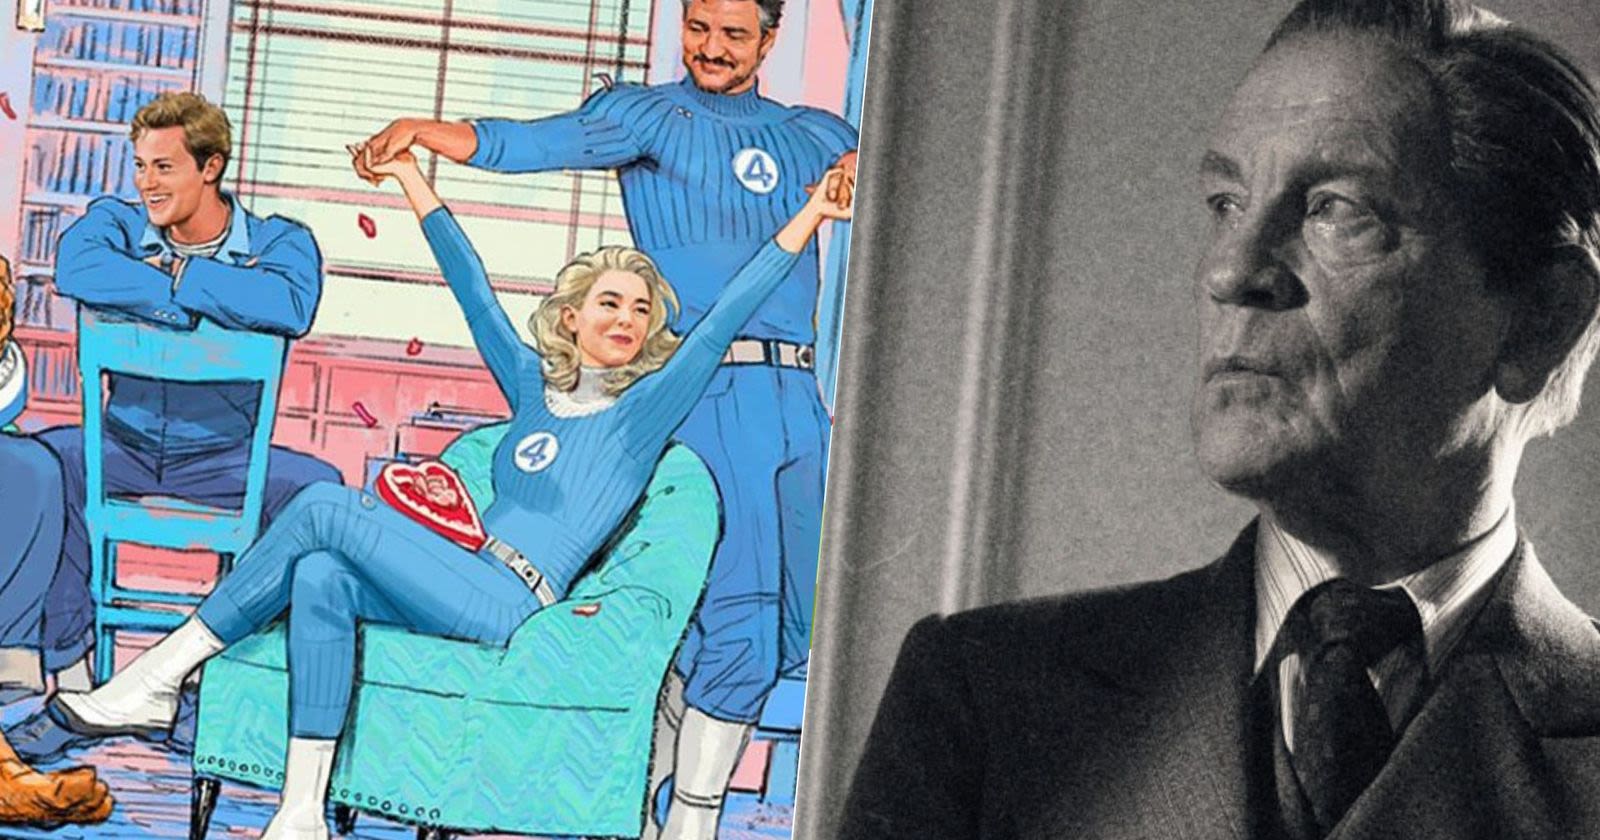 The Fantastic Four: 5 Characters John Malkovich Could Play